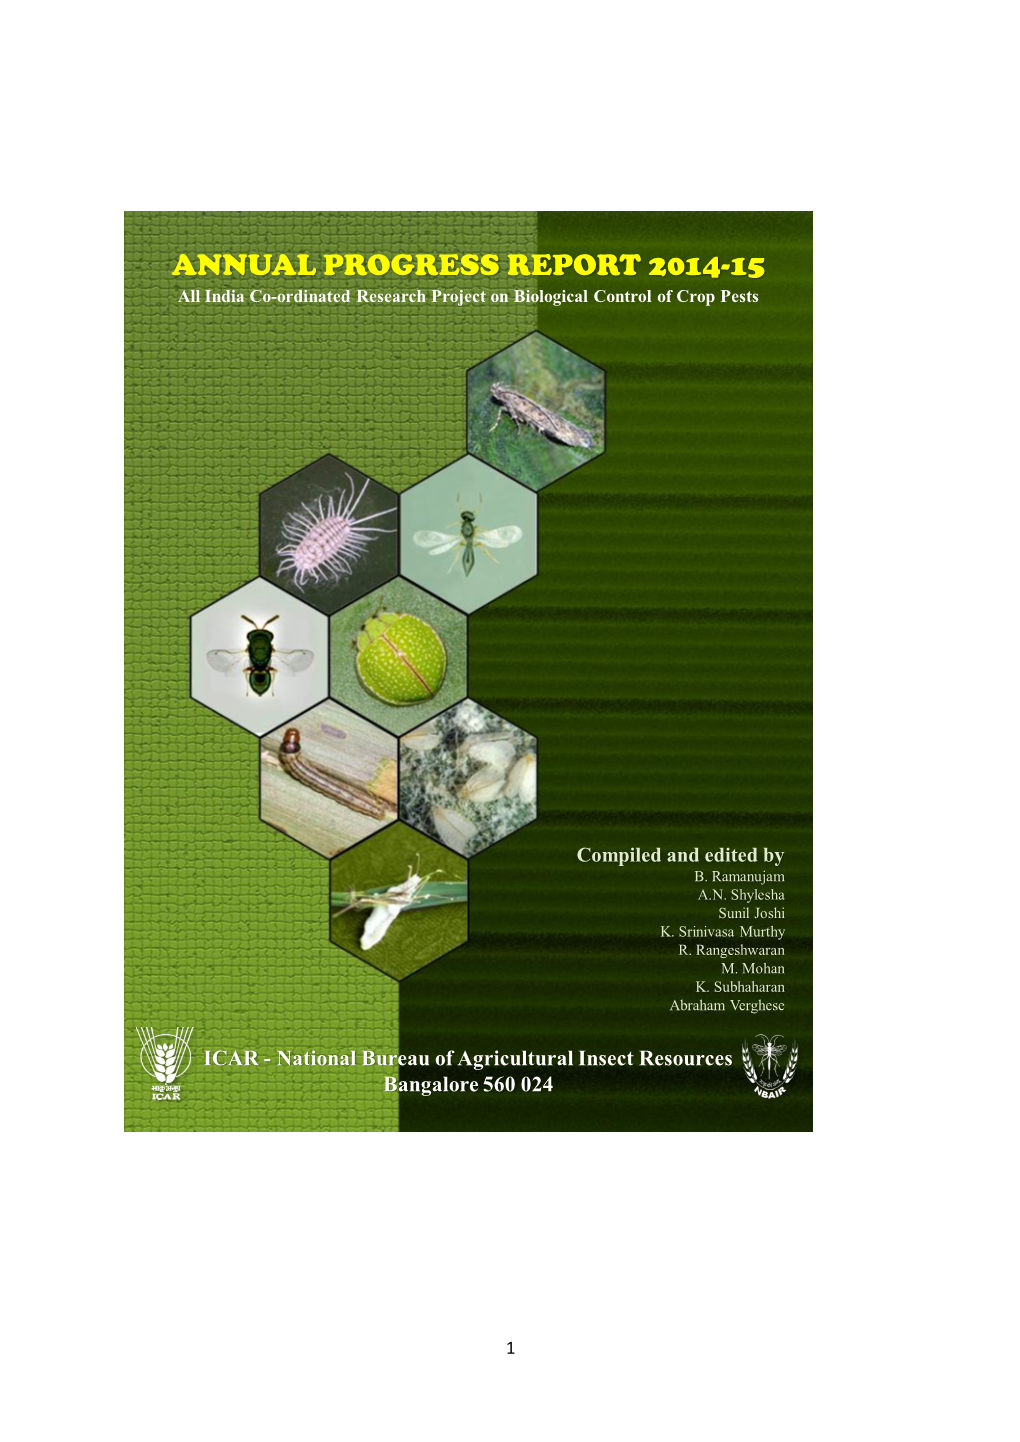 ANNUAL PROGRESS REPORT 2014-15 All India Co-Ordinated Research Project on Biological Control of Crop Pests